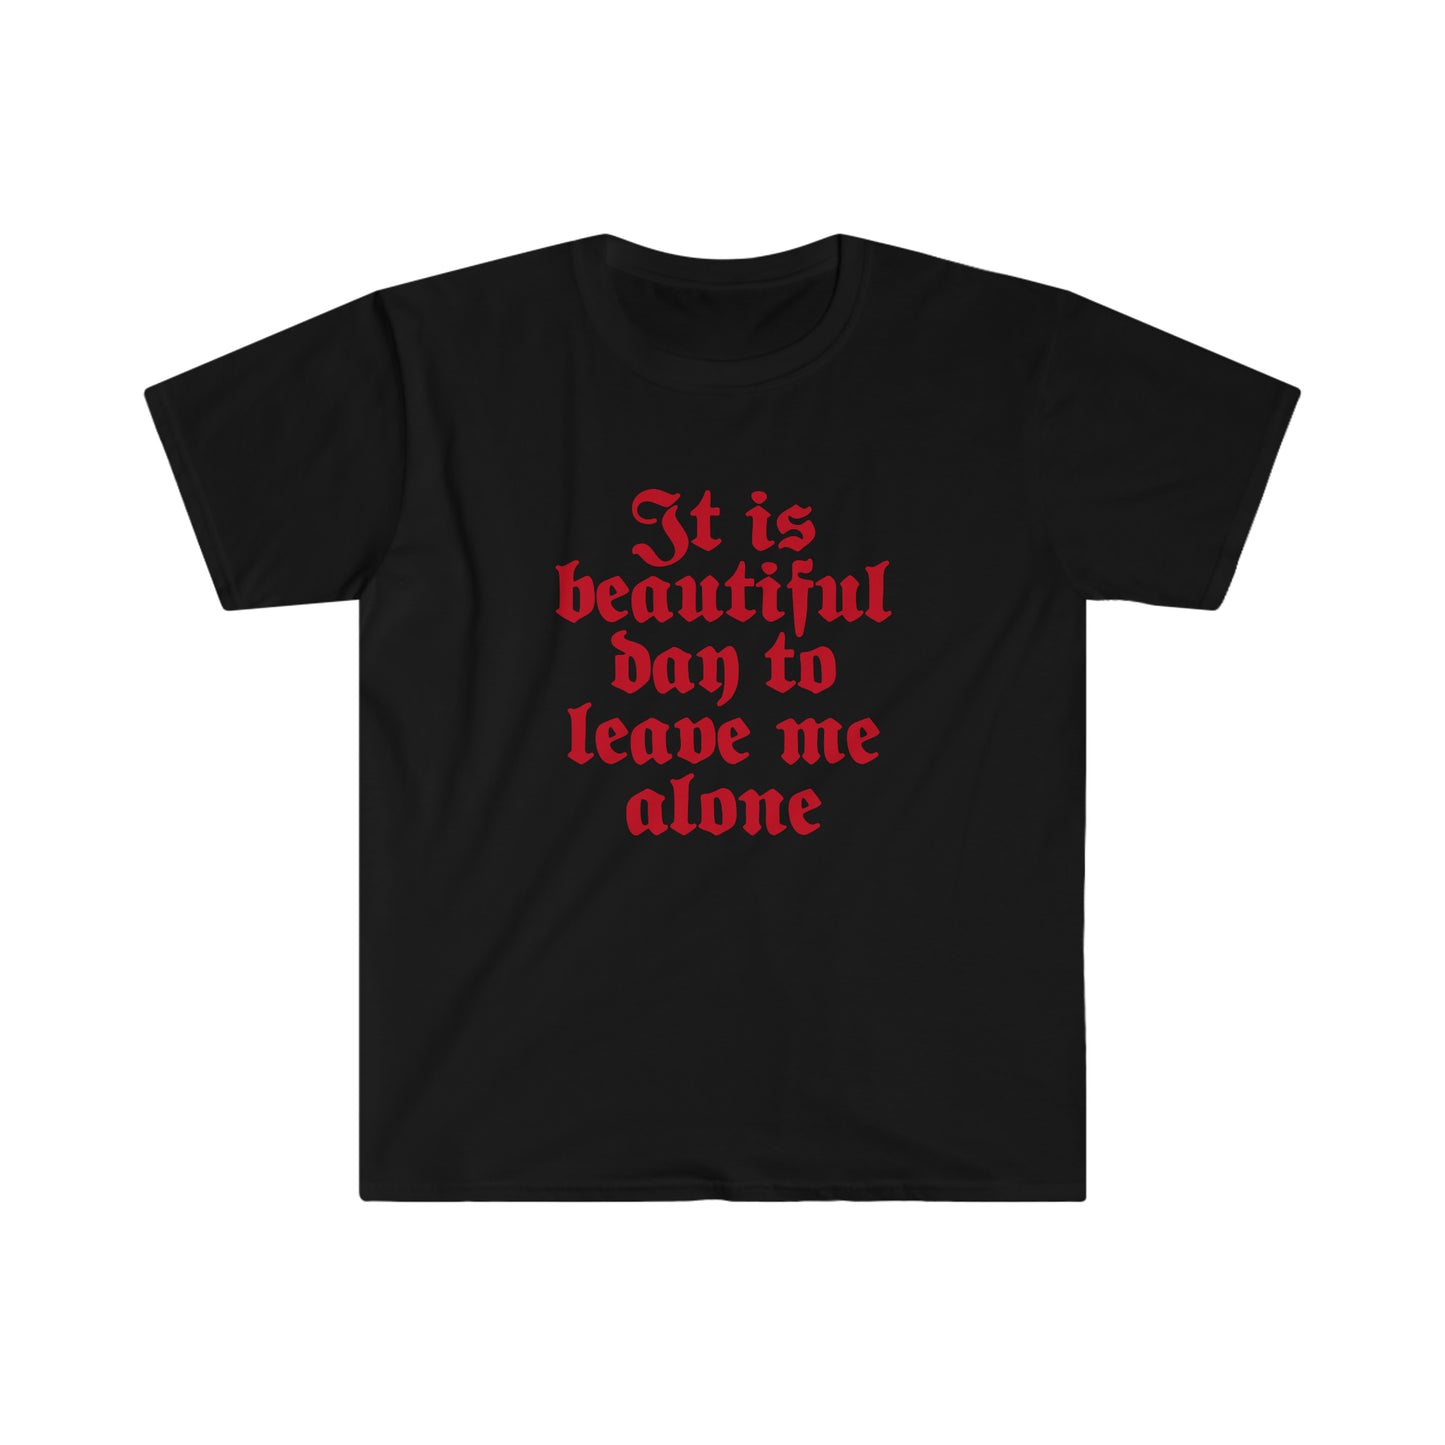 It is beautiful day to leave me alone Goth Y2k Clothing Alt Aesthetic Goth Punk T-Shirt